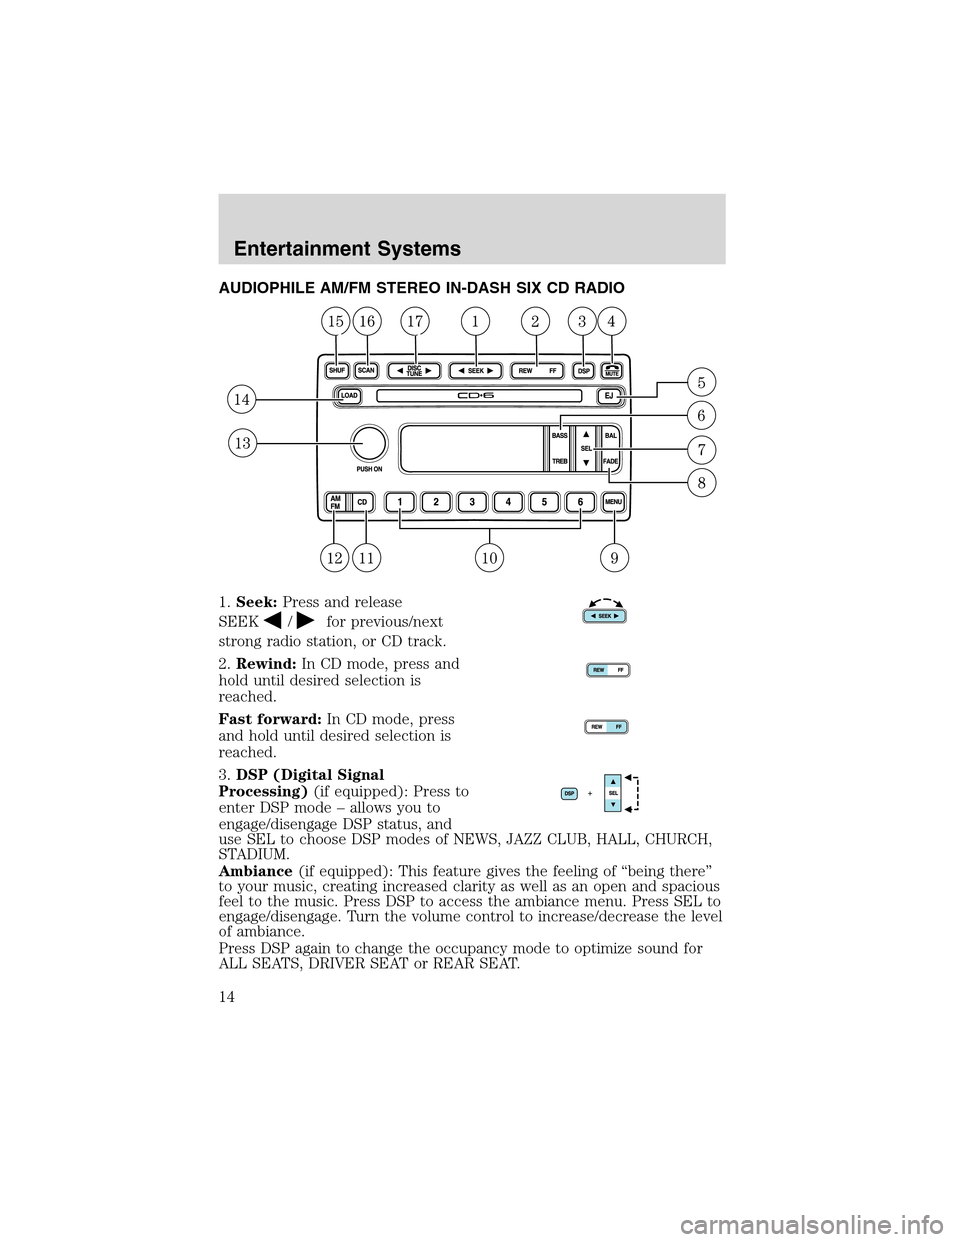 FORD THUNDERBIRD 2003 11.G Owners Manual AUDIOPHILE AM/FM STEREO IN-DASH SIX CD RADIO
1.Seek:Press and release
SEEK
/for previous/next
strong radio station, or CD track.
2.Rewind:In CD mode, press and
hold until desired selection is
reached.